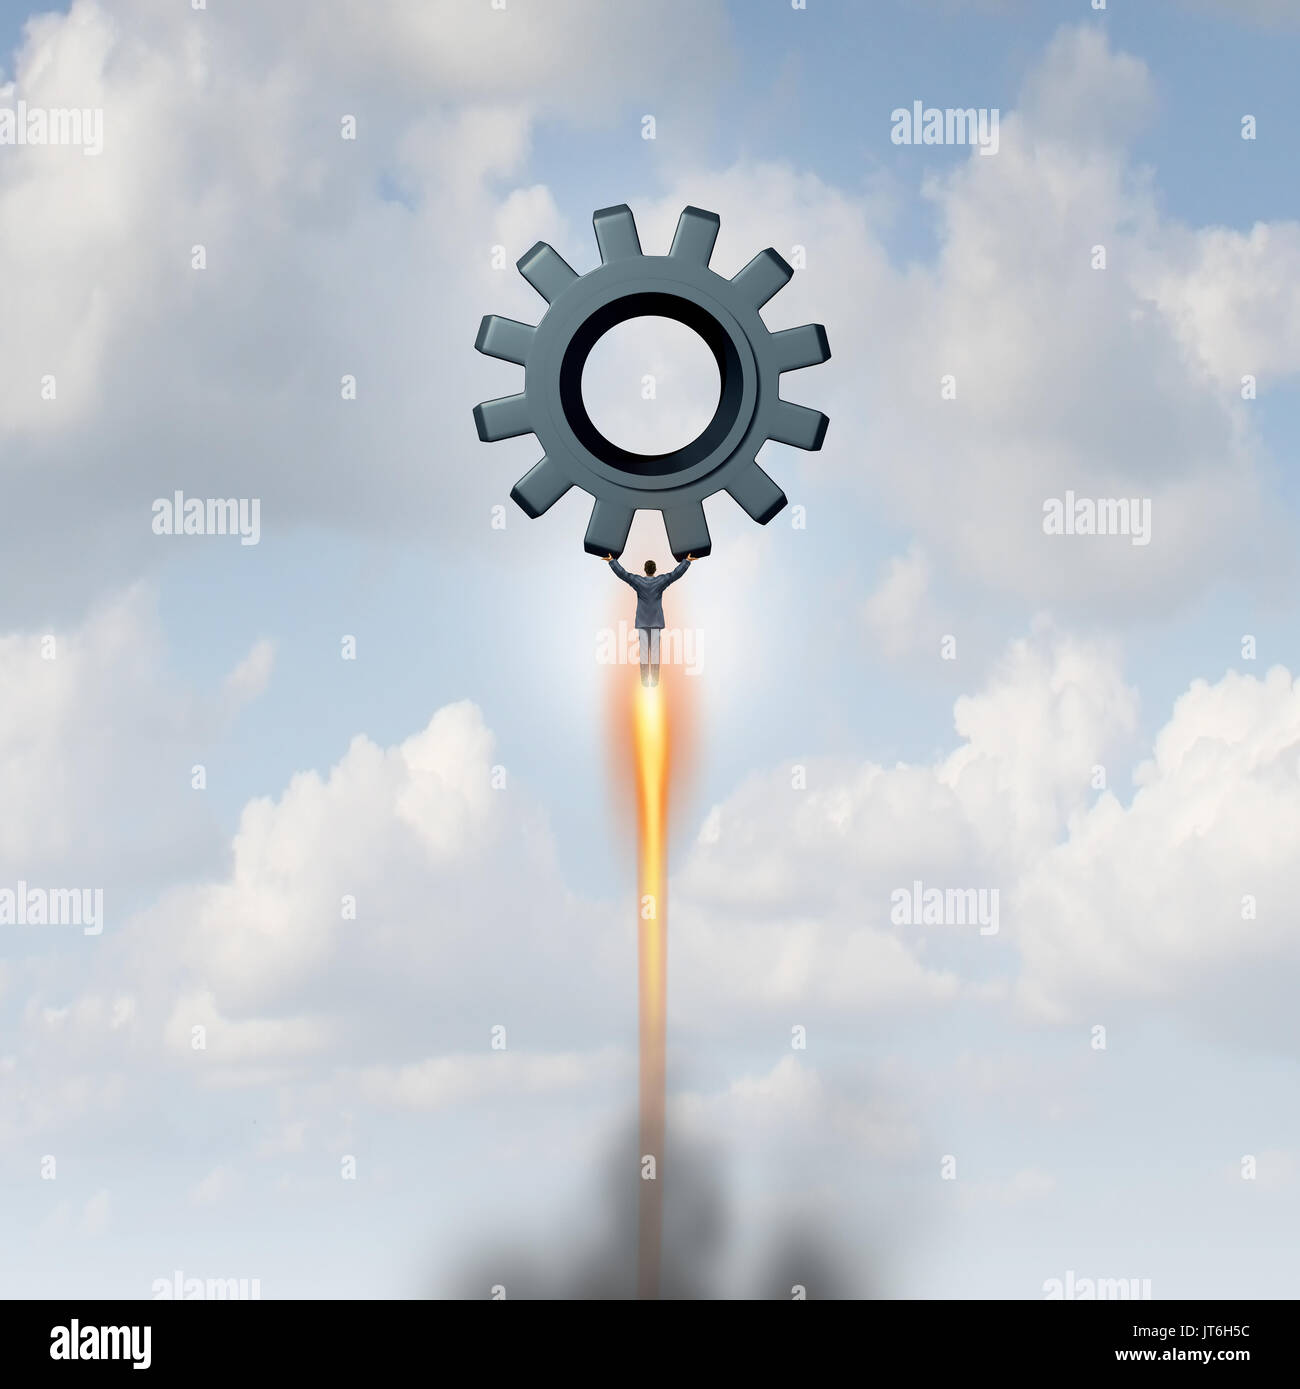 Business fast service as a businessman flying upward as a rocket representing efficient cloud management or financial corporate assistance. Stock Photo